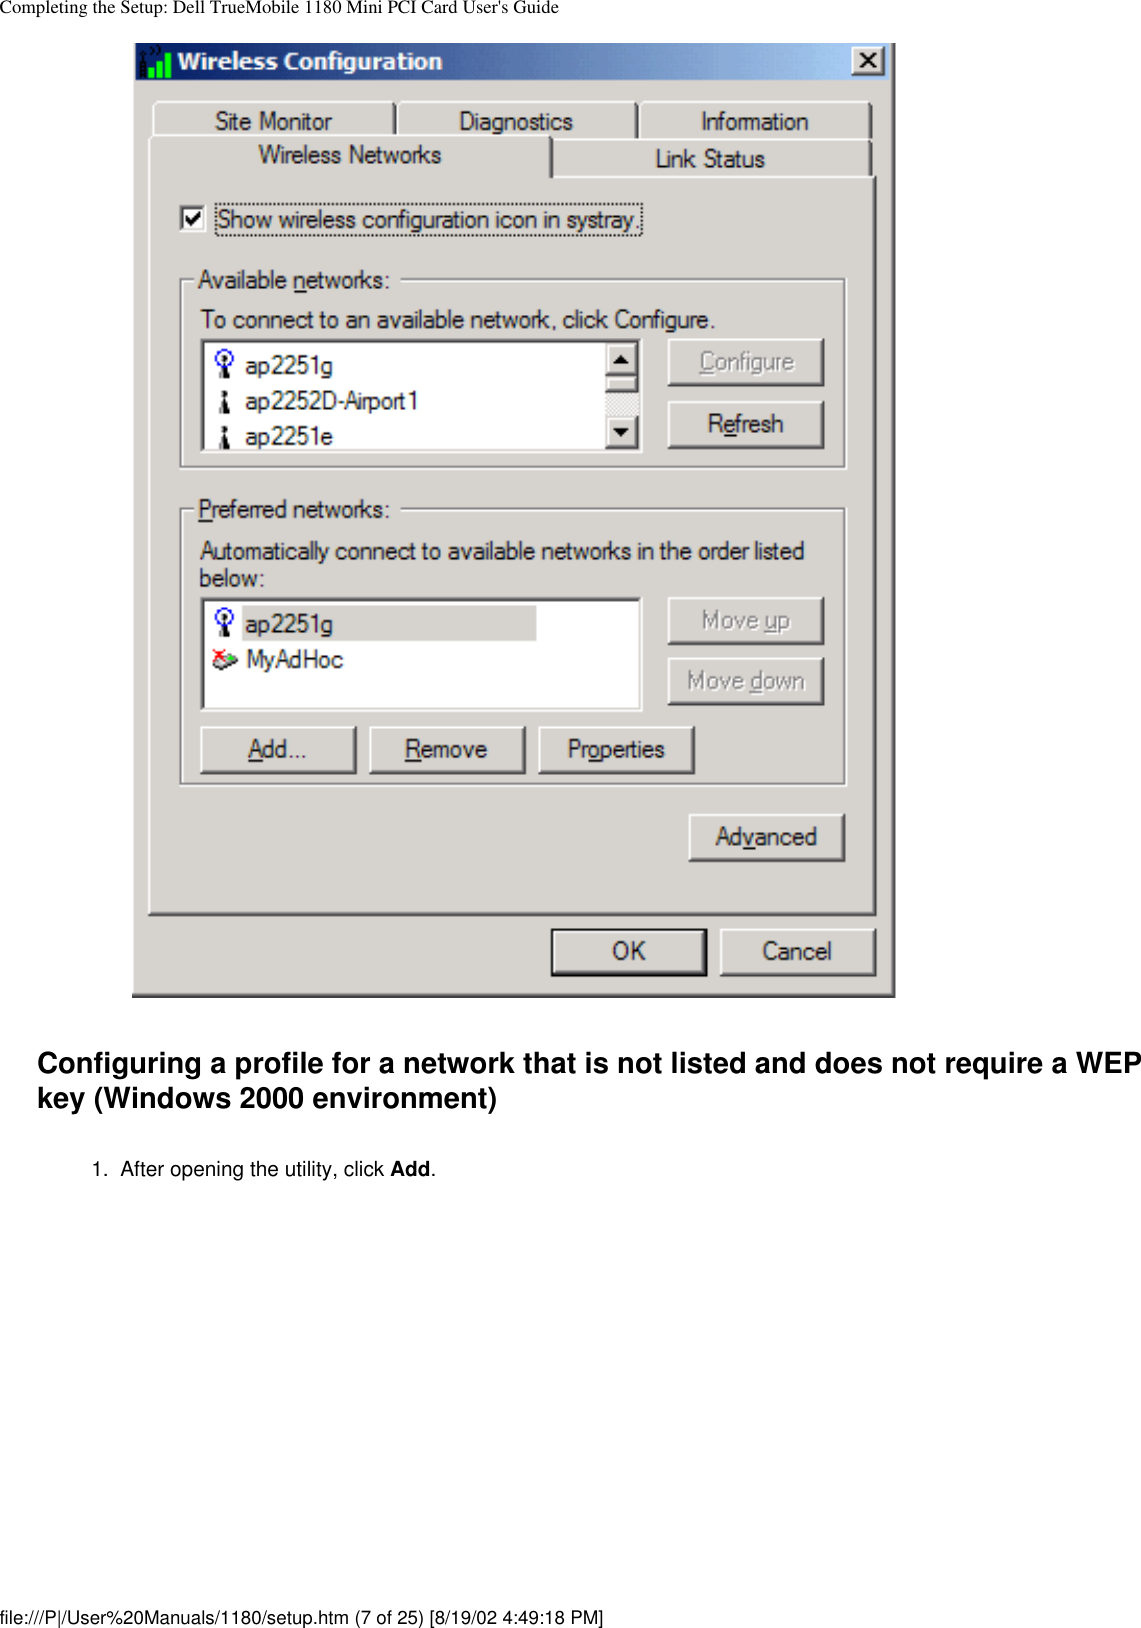 Completing the Setup: Dell TrueMobile 1180 Mini PCI Card User&apos;s GuideConfiguring a profile for a network that is not listed and does not require a WEP key (Windows 2000 environment)1.  After opening the utility, click Add. file:///P|/User%20Manuals/1180/setup.htm (7 of 25) [8/19/02 4:49:18 PM]